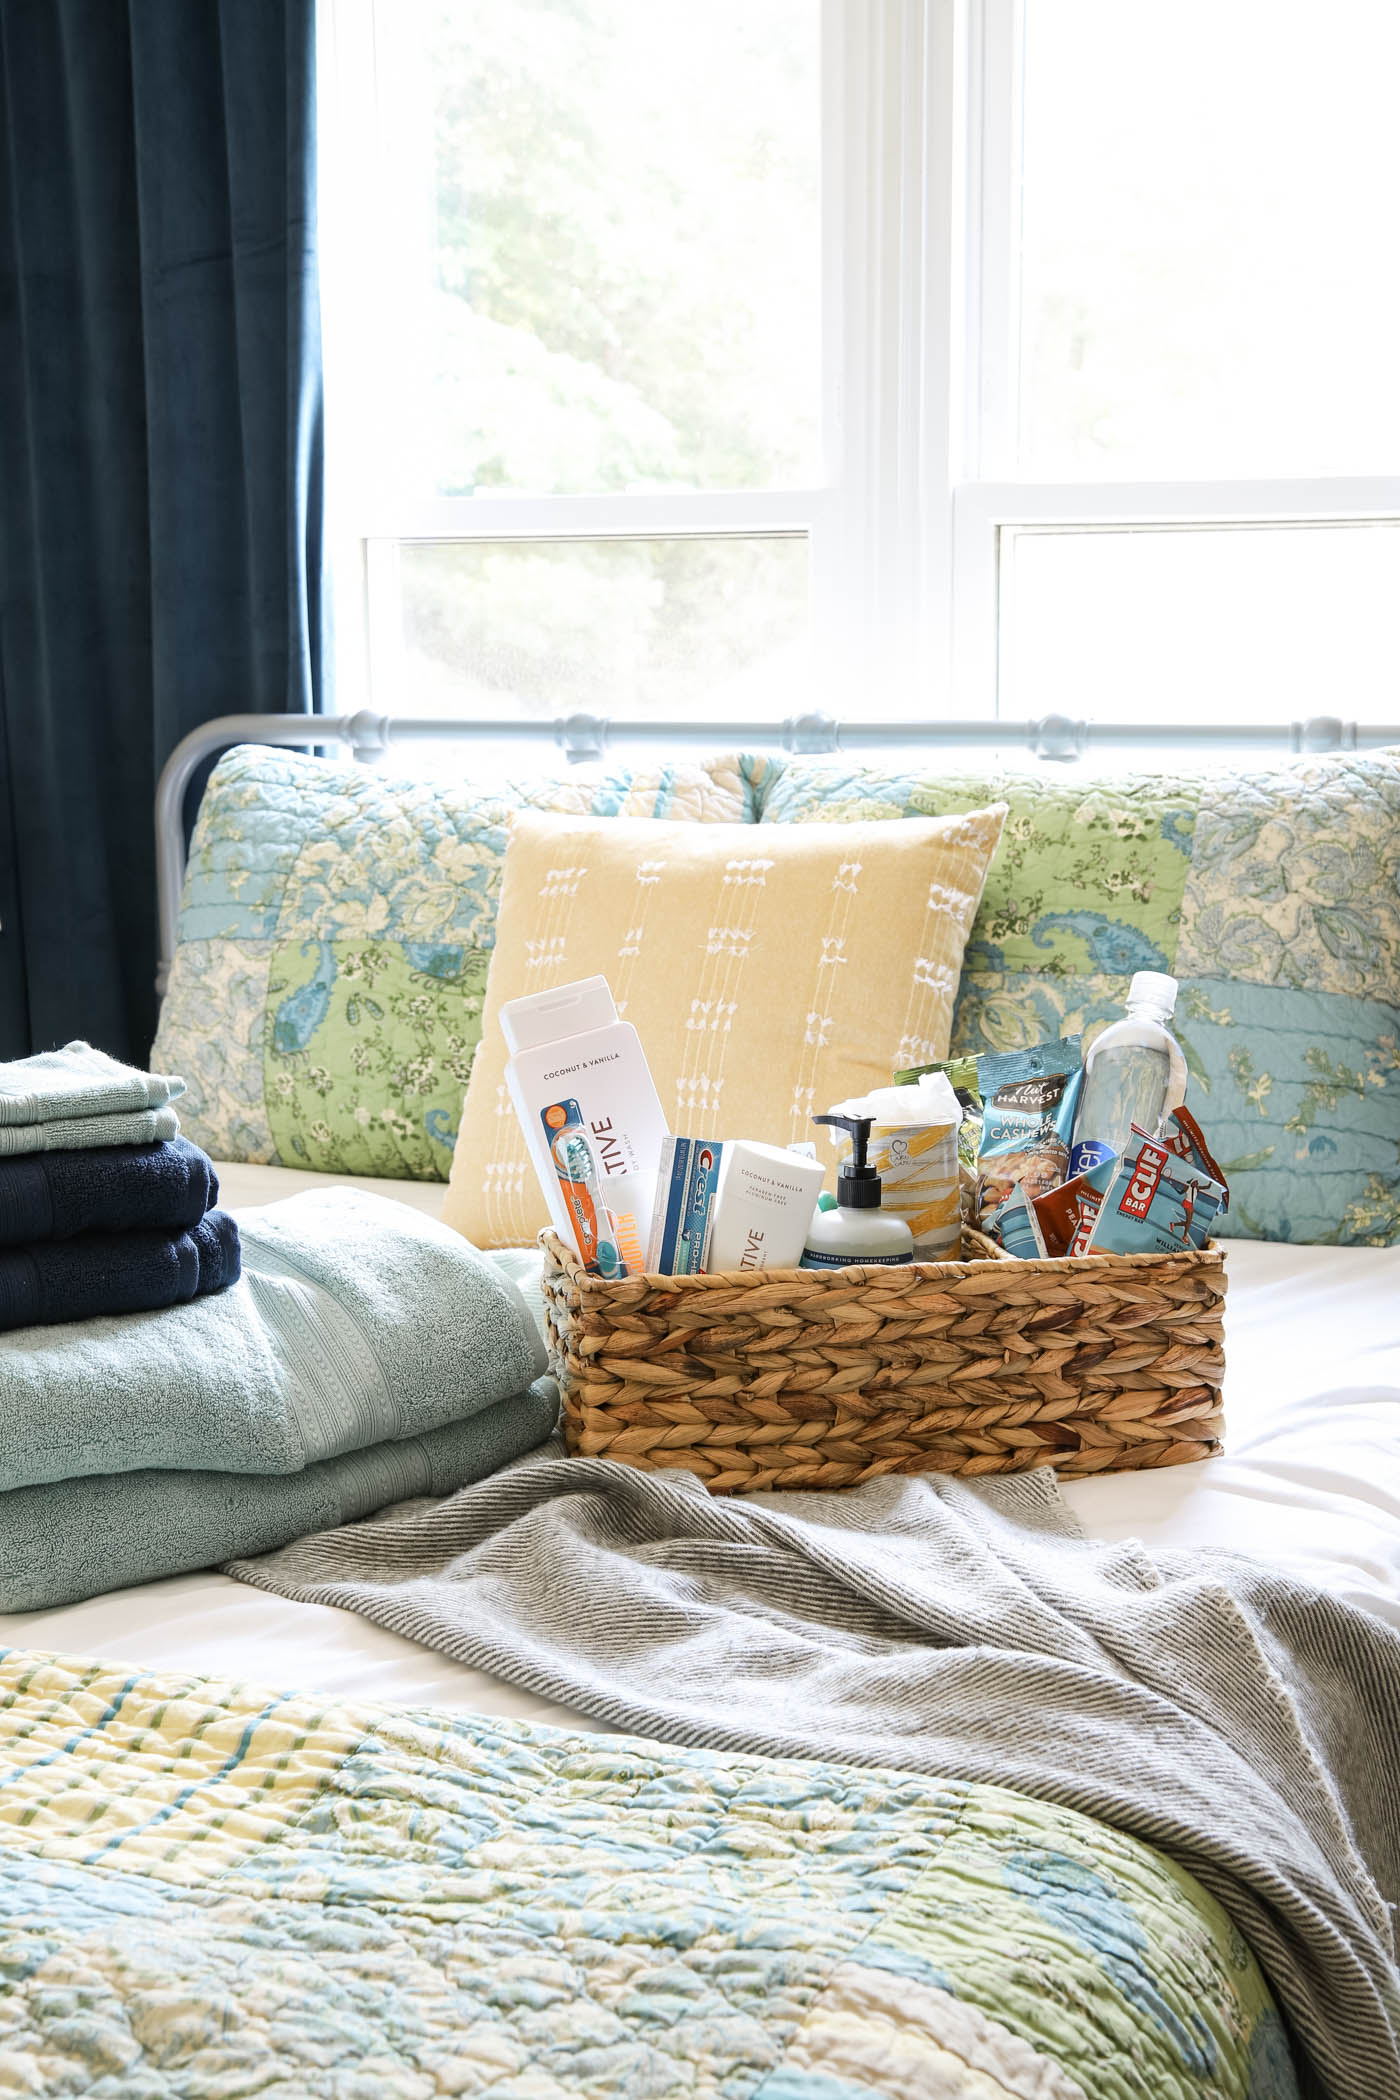 Guest Room Essentials {to make guests feel at home}